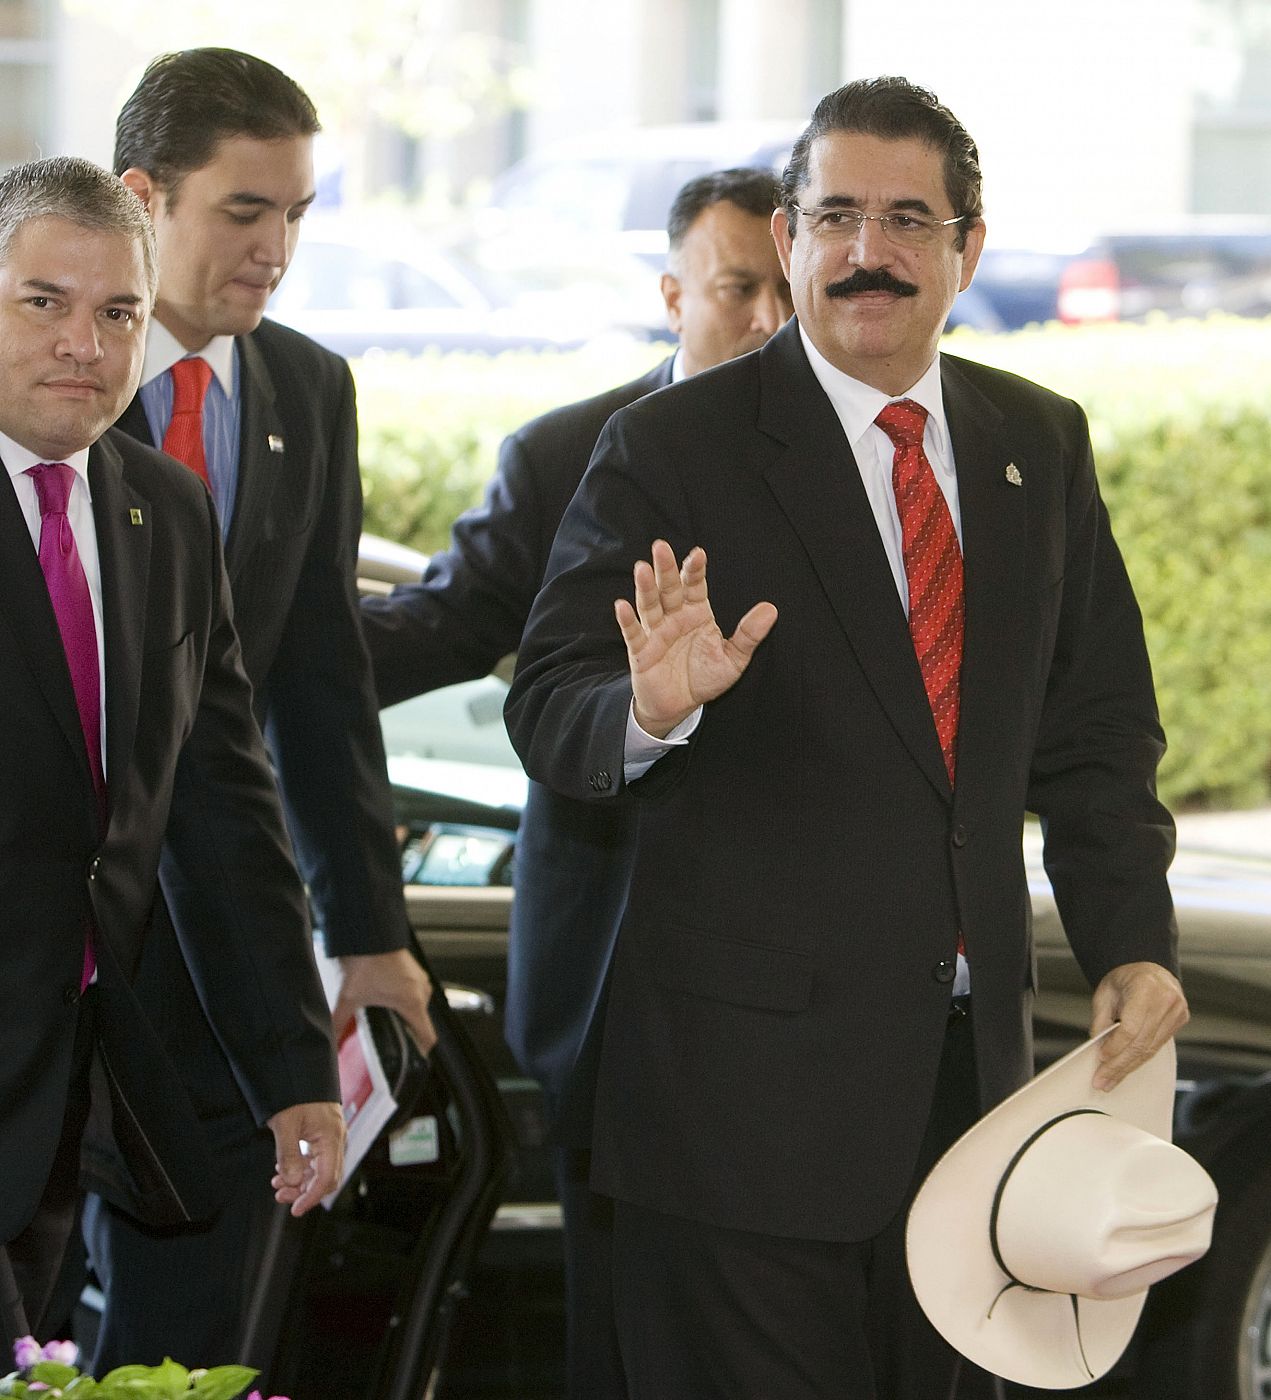 Ousted Honduran President Zelaya waves as he arrives at U.S. State Department for meeting with U.S. Secretary of State Clinton in Washington